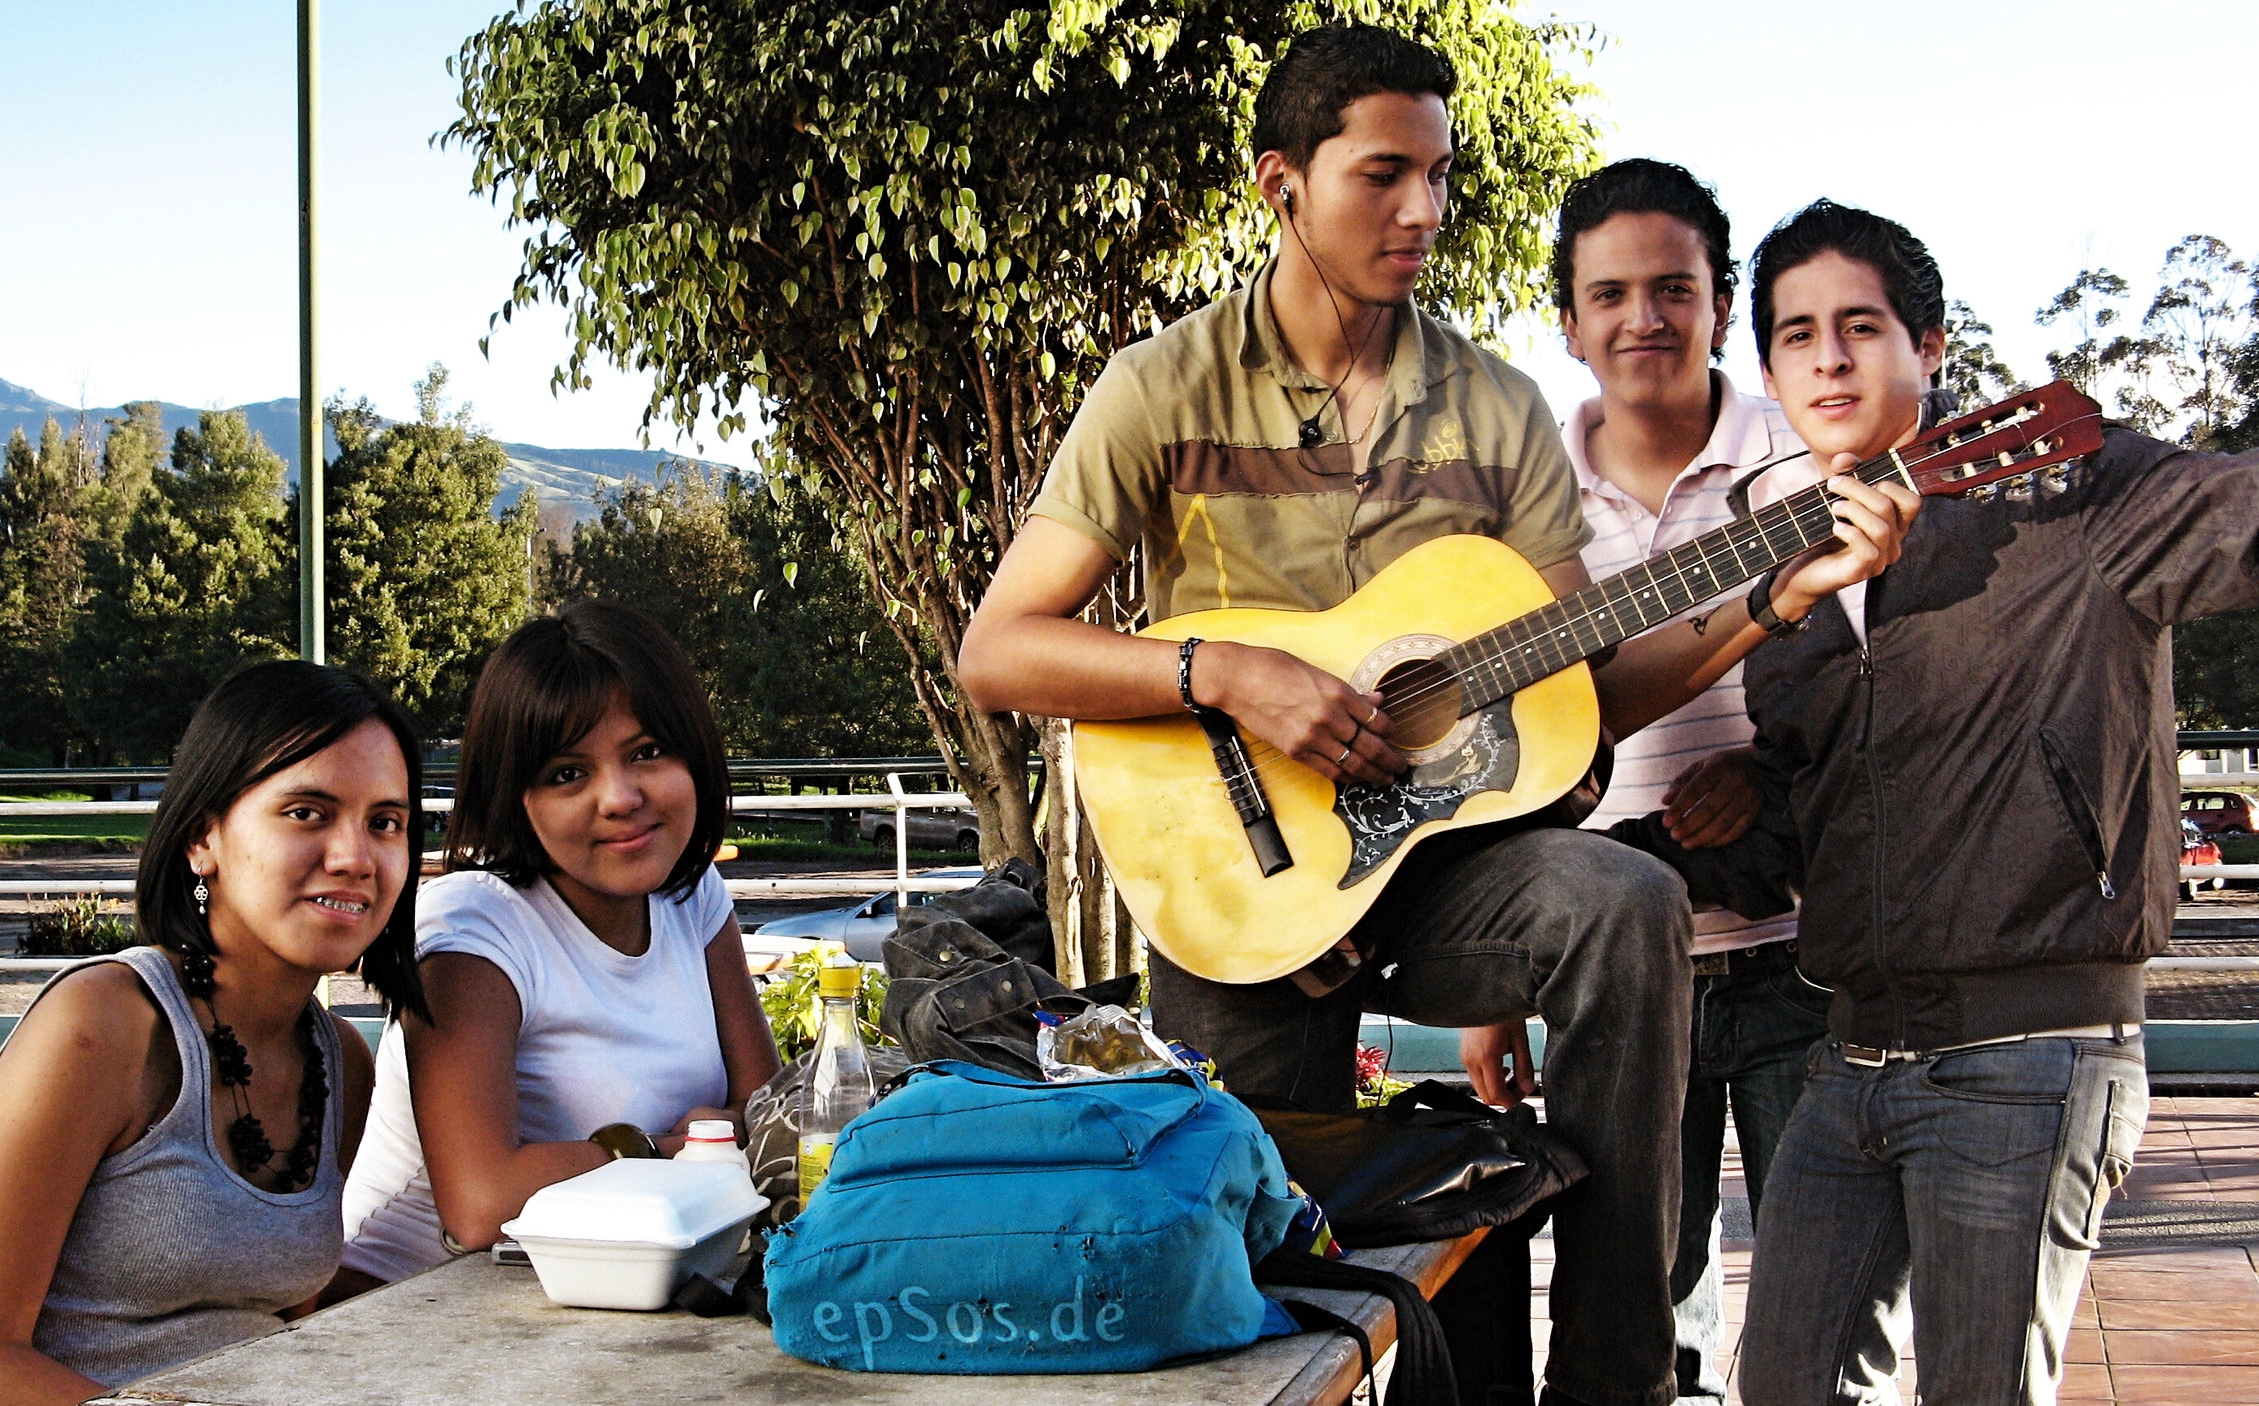 Dominican Republic’s Teens: The happiest students in the world